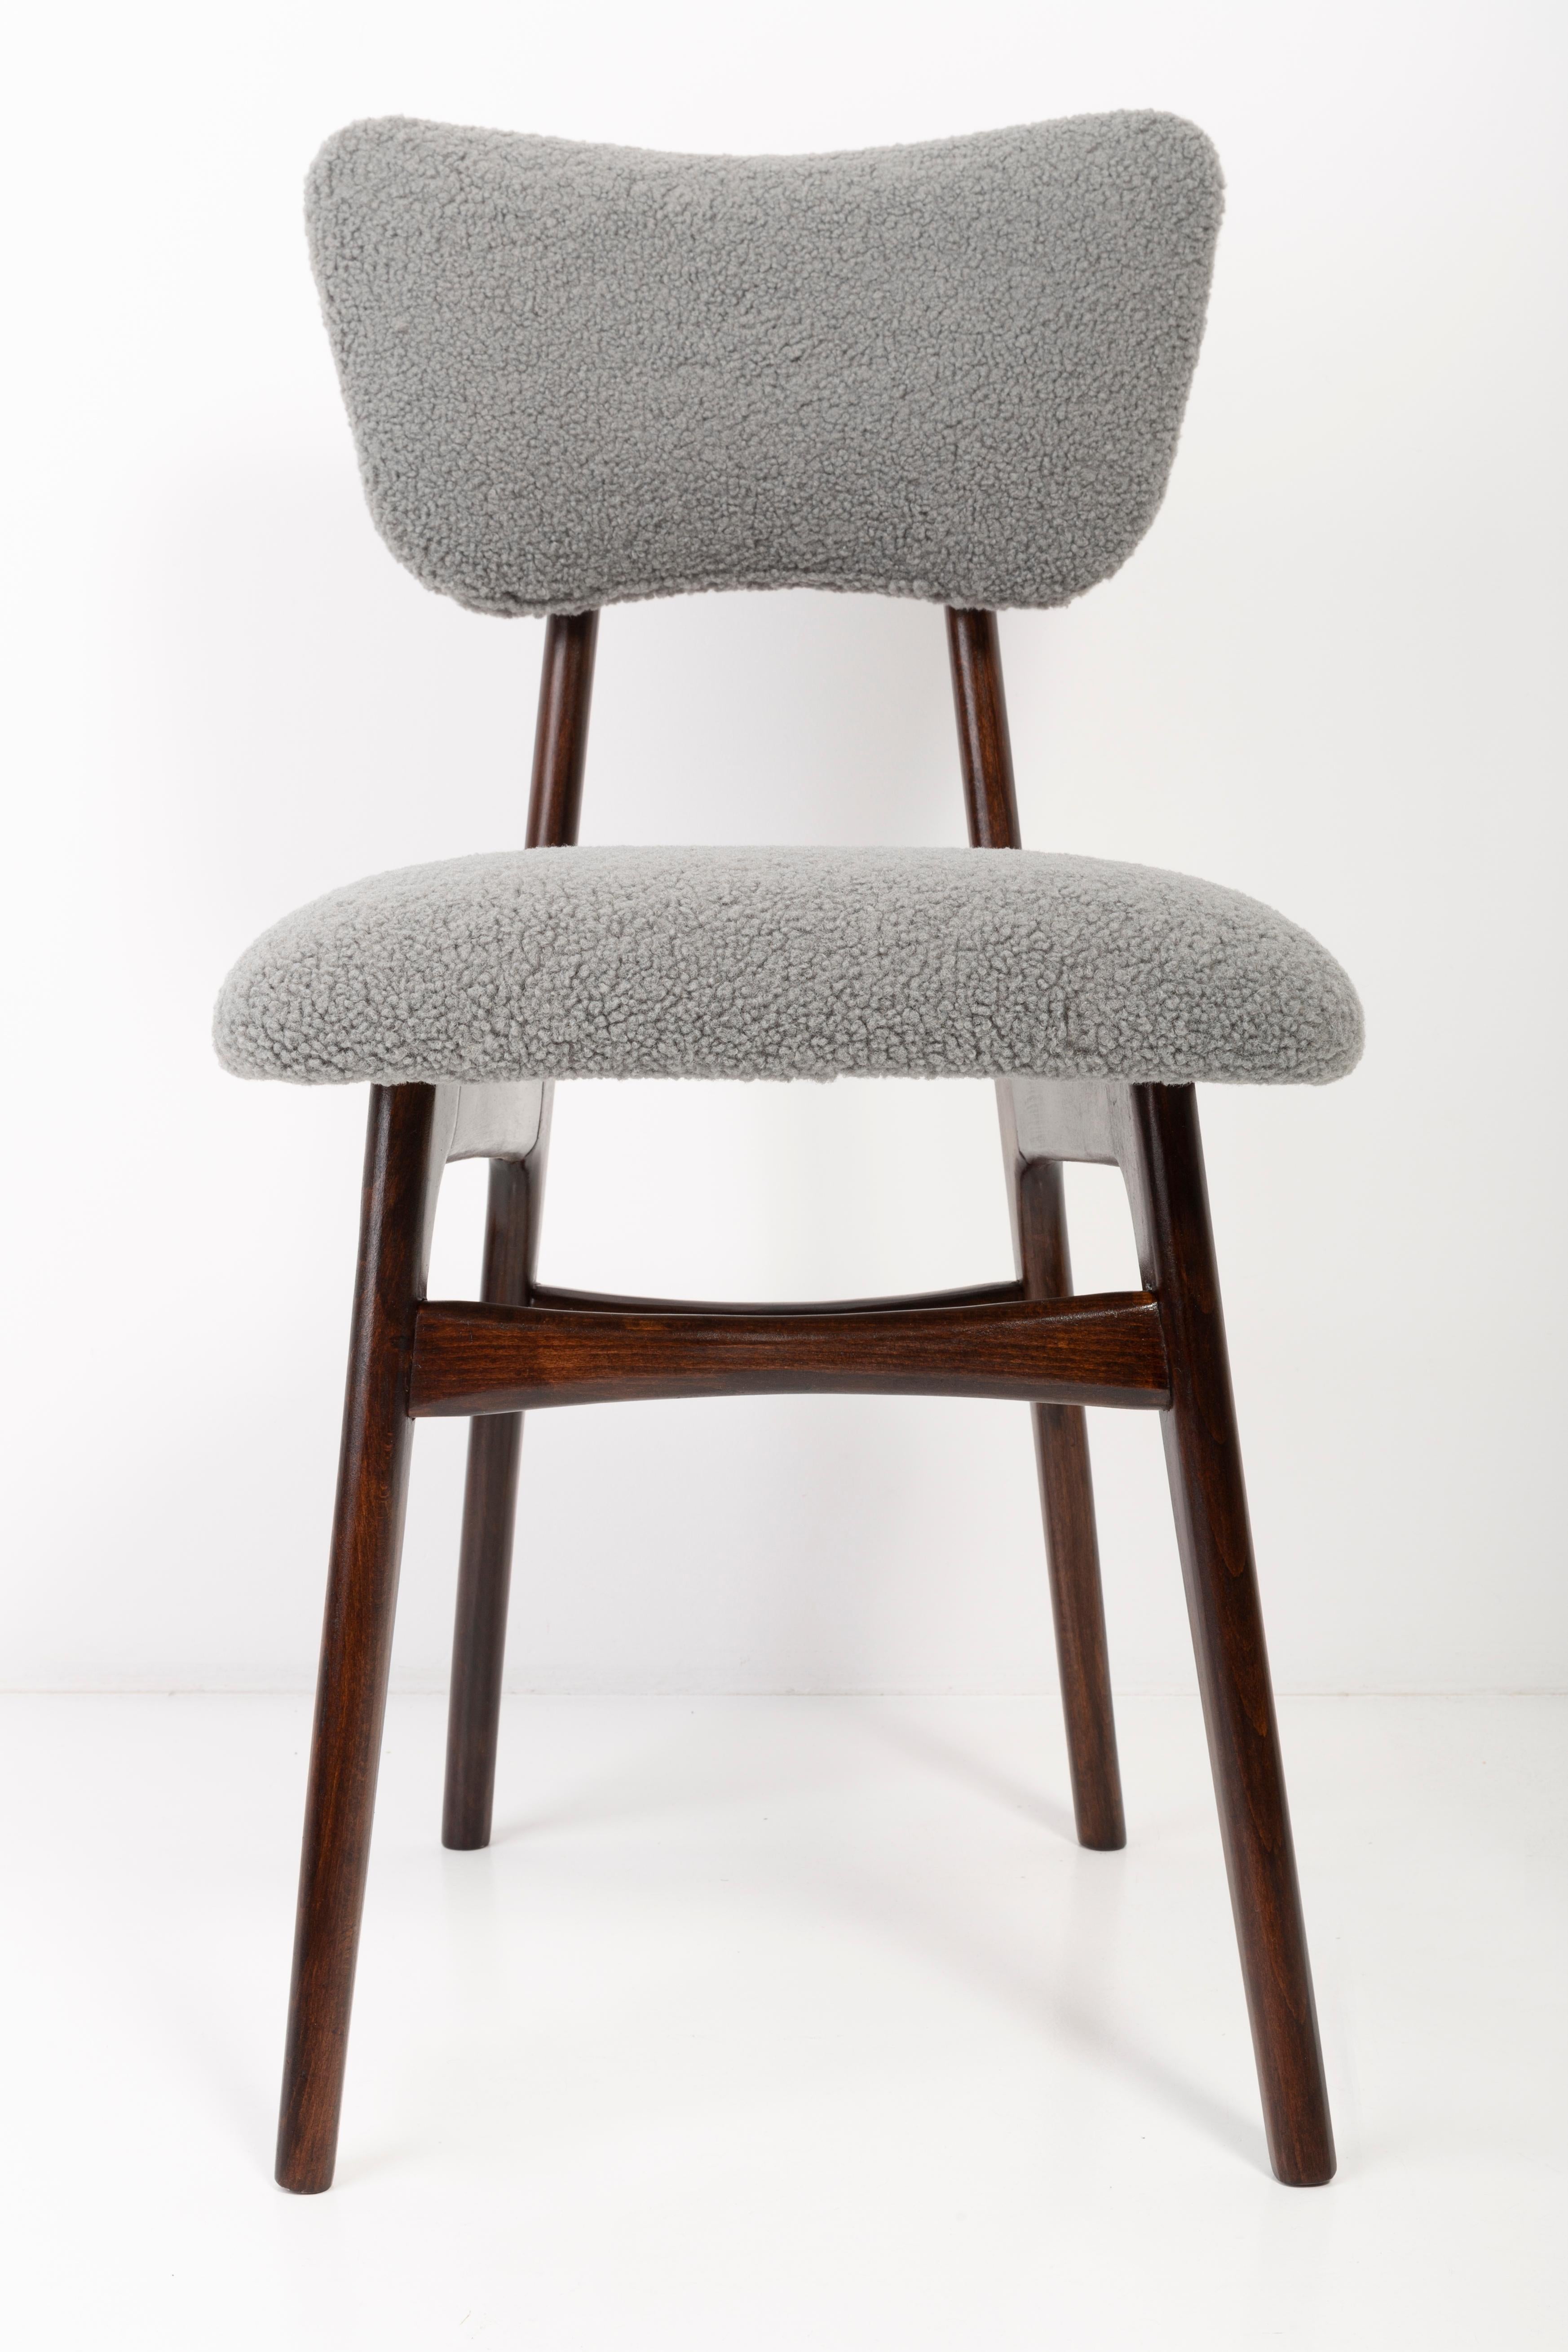 Two 20th Century Gray Boucle Chairs, 1960s For Sale 5